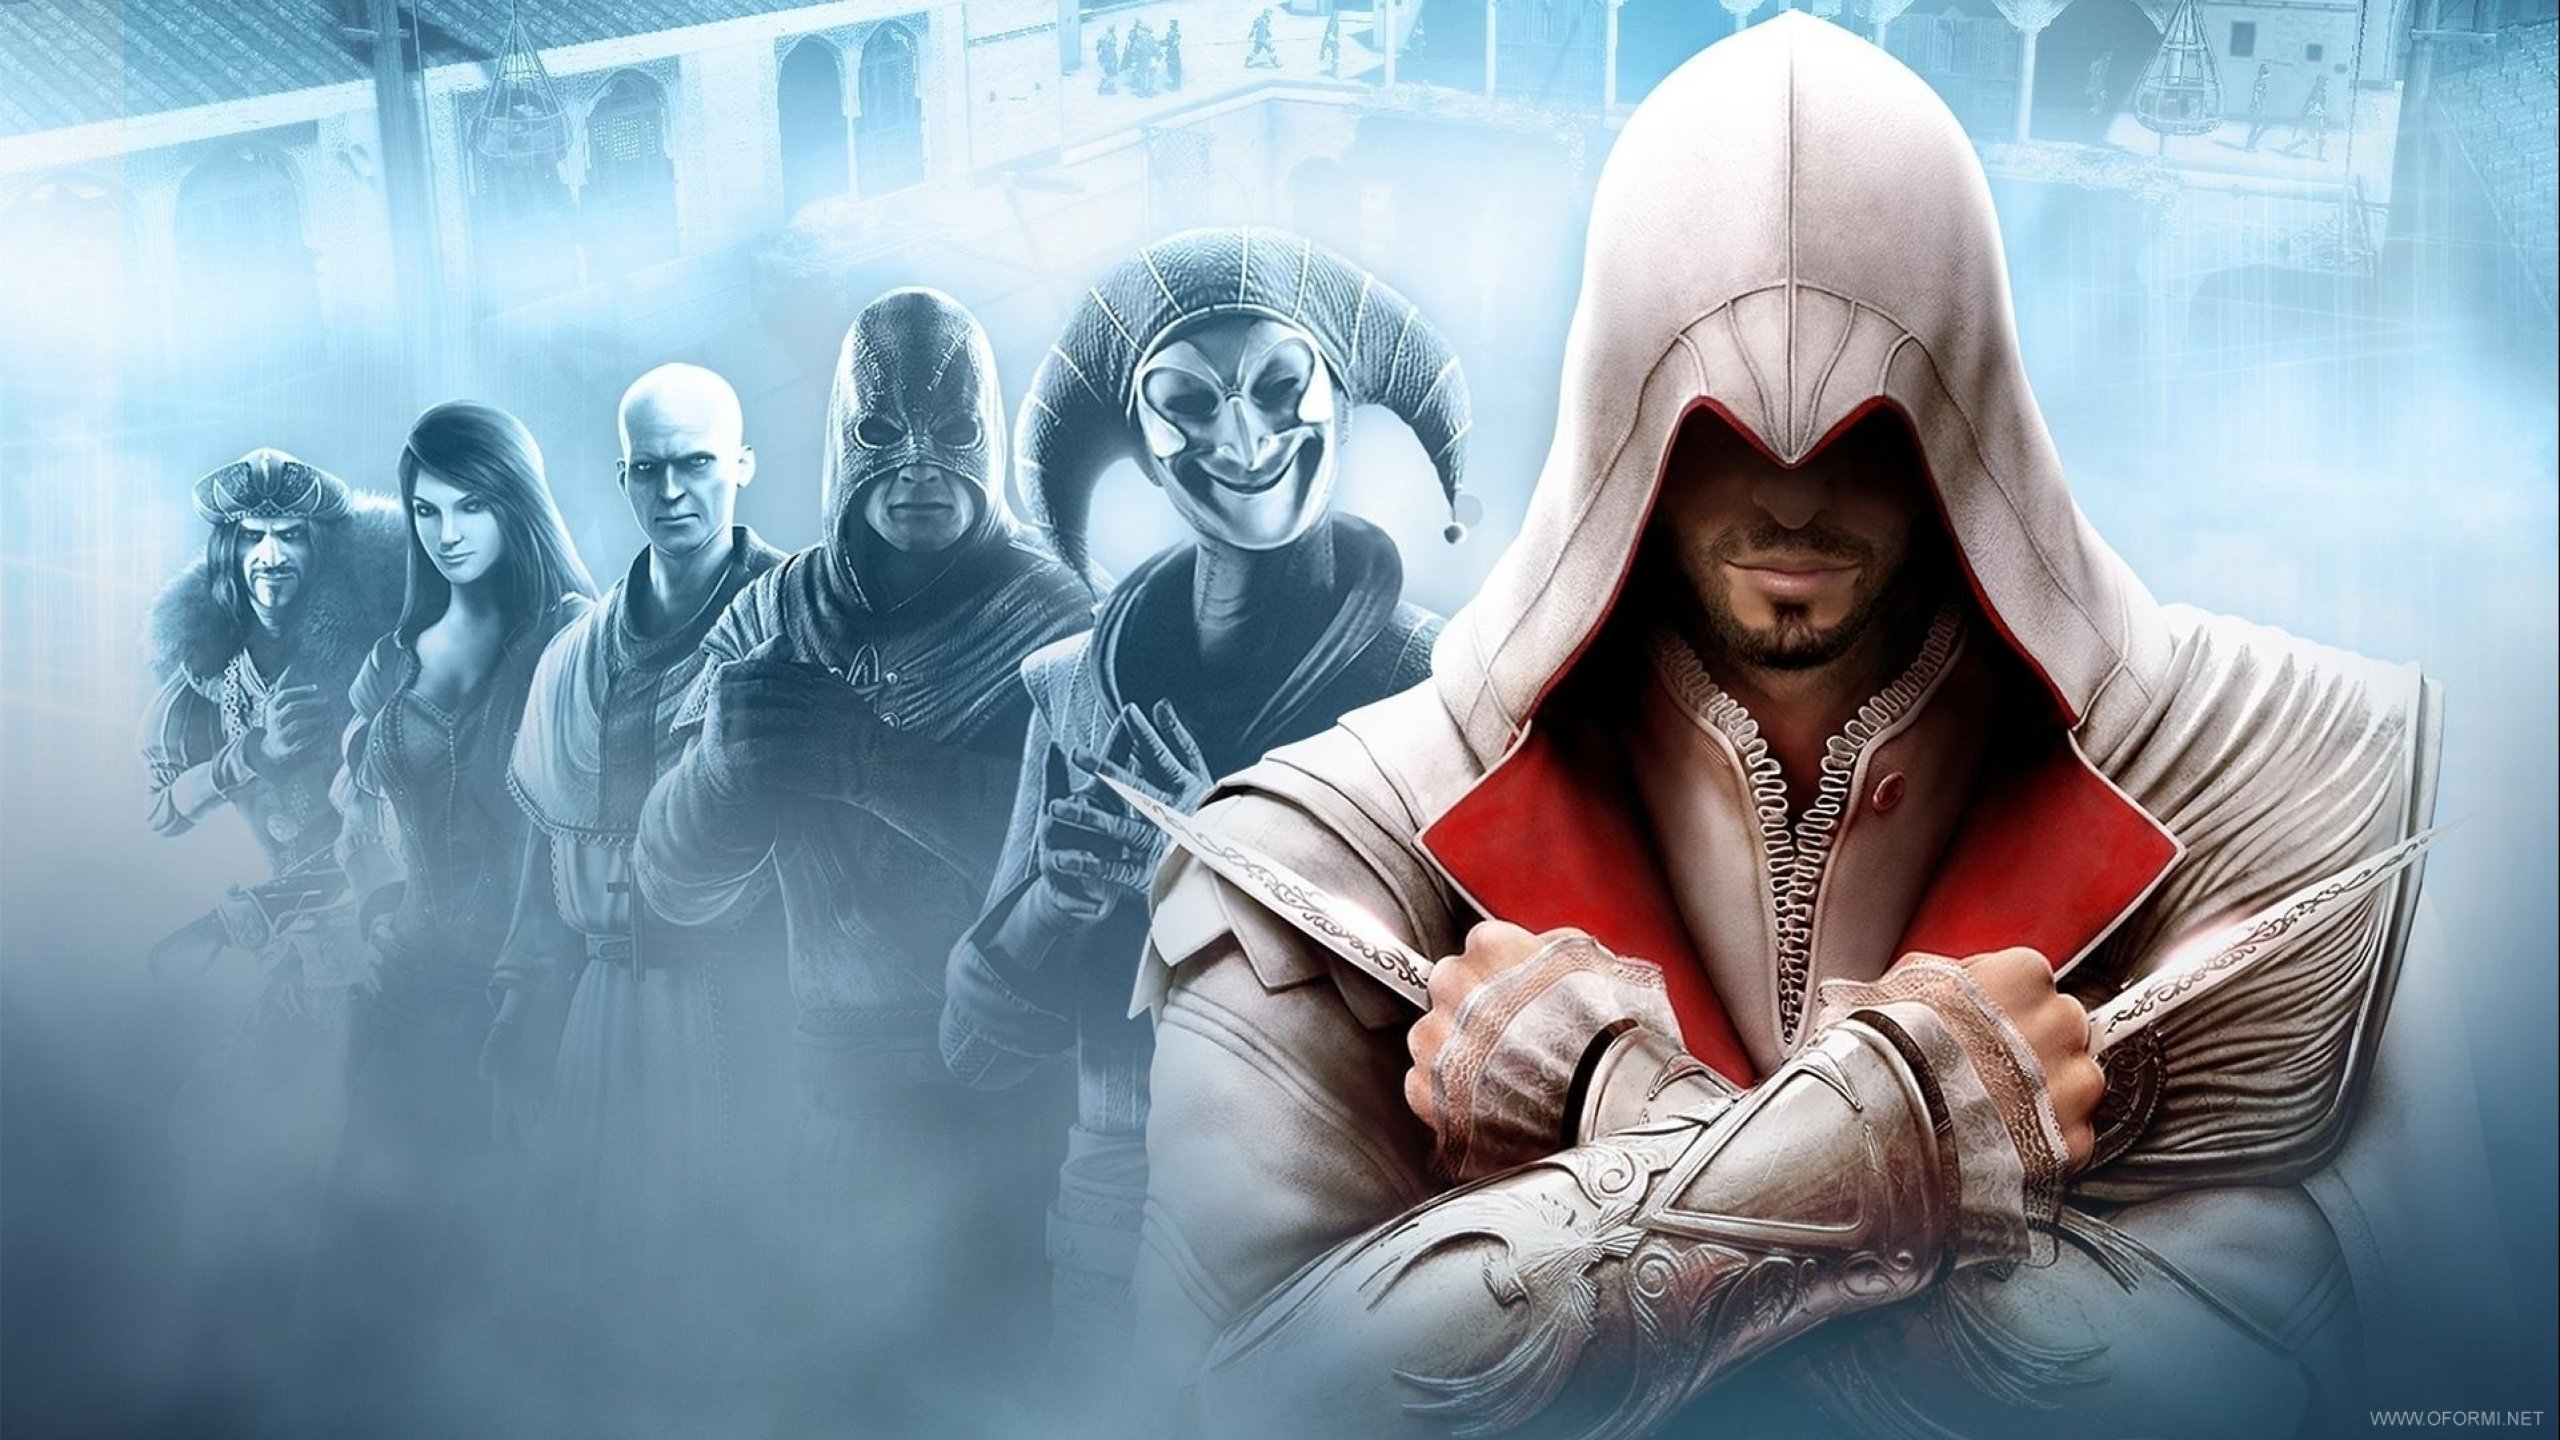 Free download 61 Assassins Creed Brotherhood HD Wallpaper Background Image [2560x1440] for your Desktop, Mobile & Tablet. Explore Assassin's Creed Brotherhood Wallpaper HD. Assassins Creed 3 Wallpaper, Assassins Creed